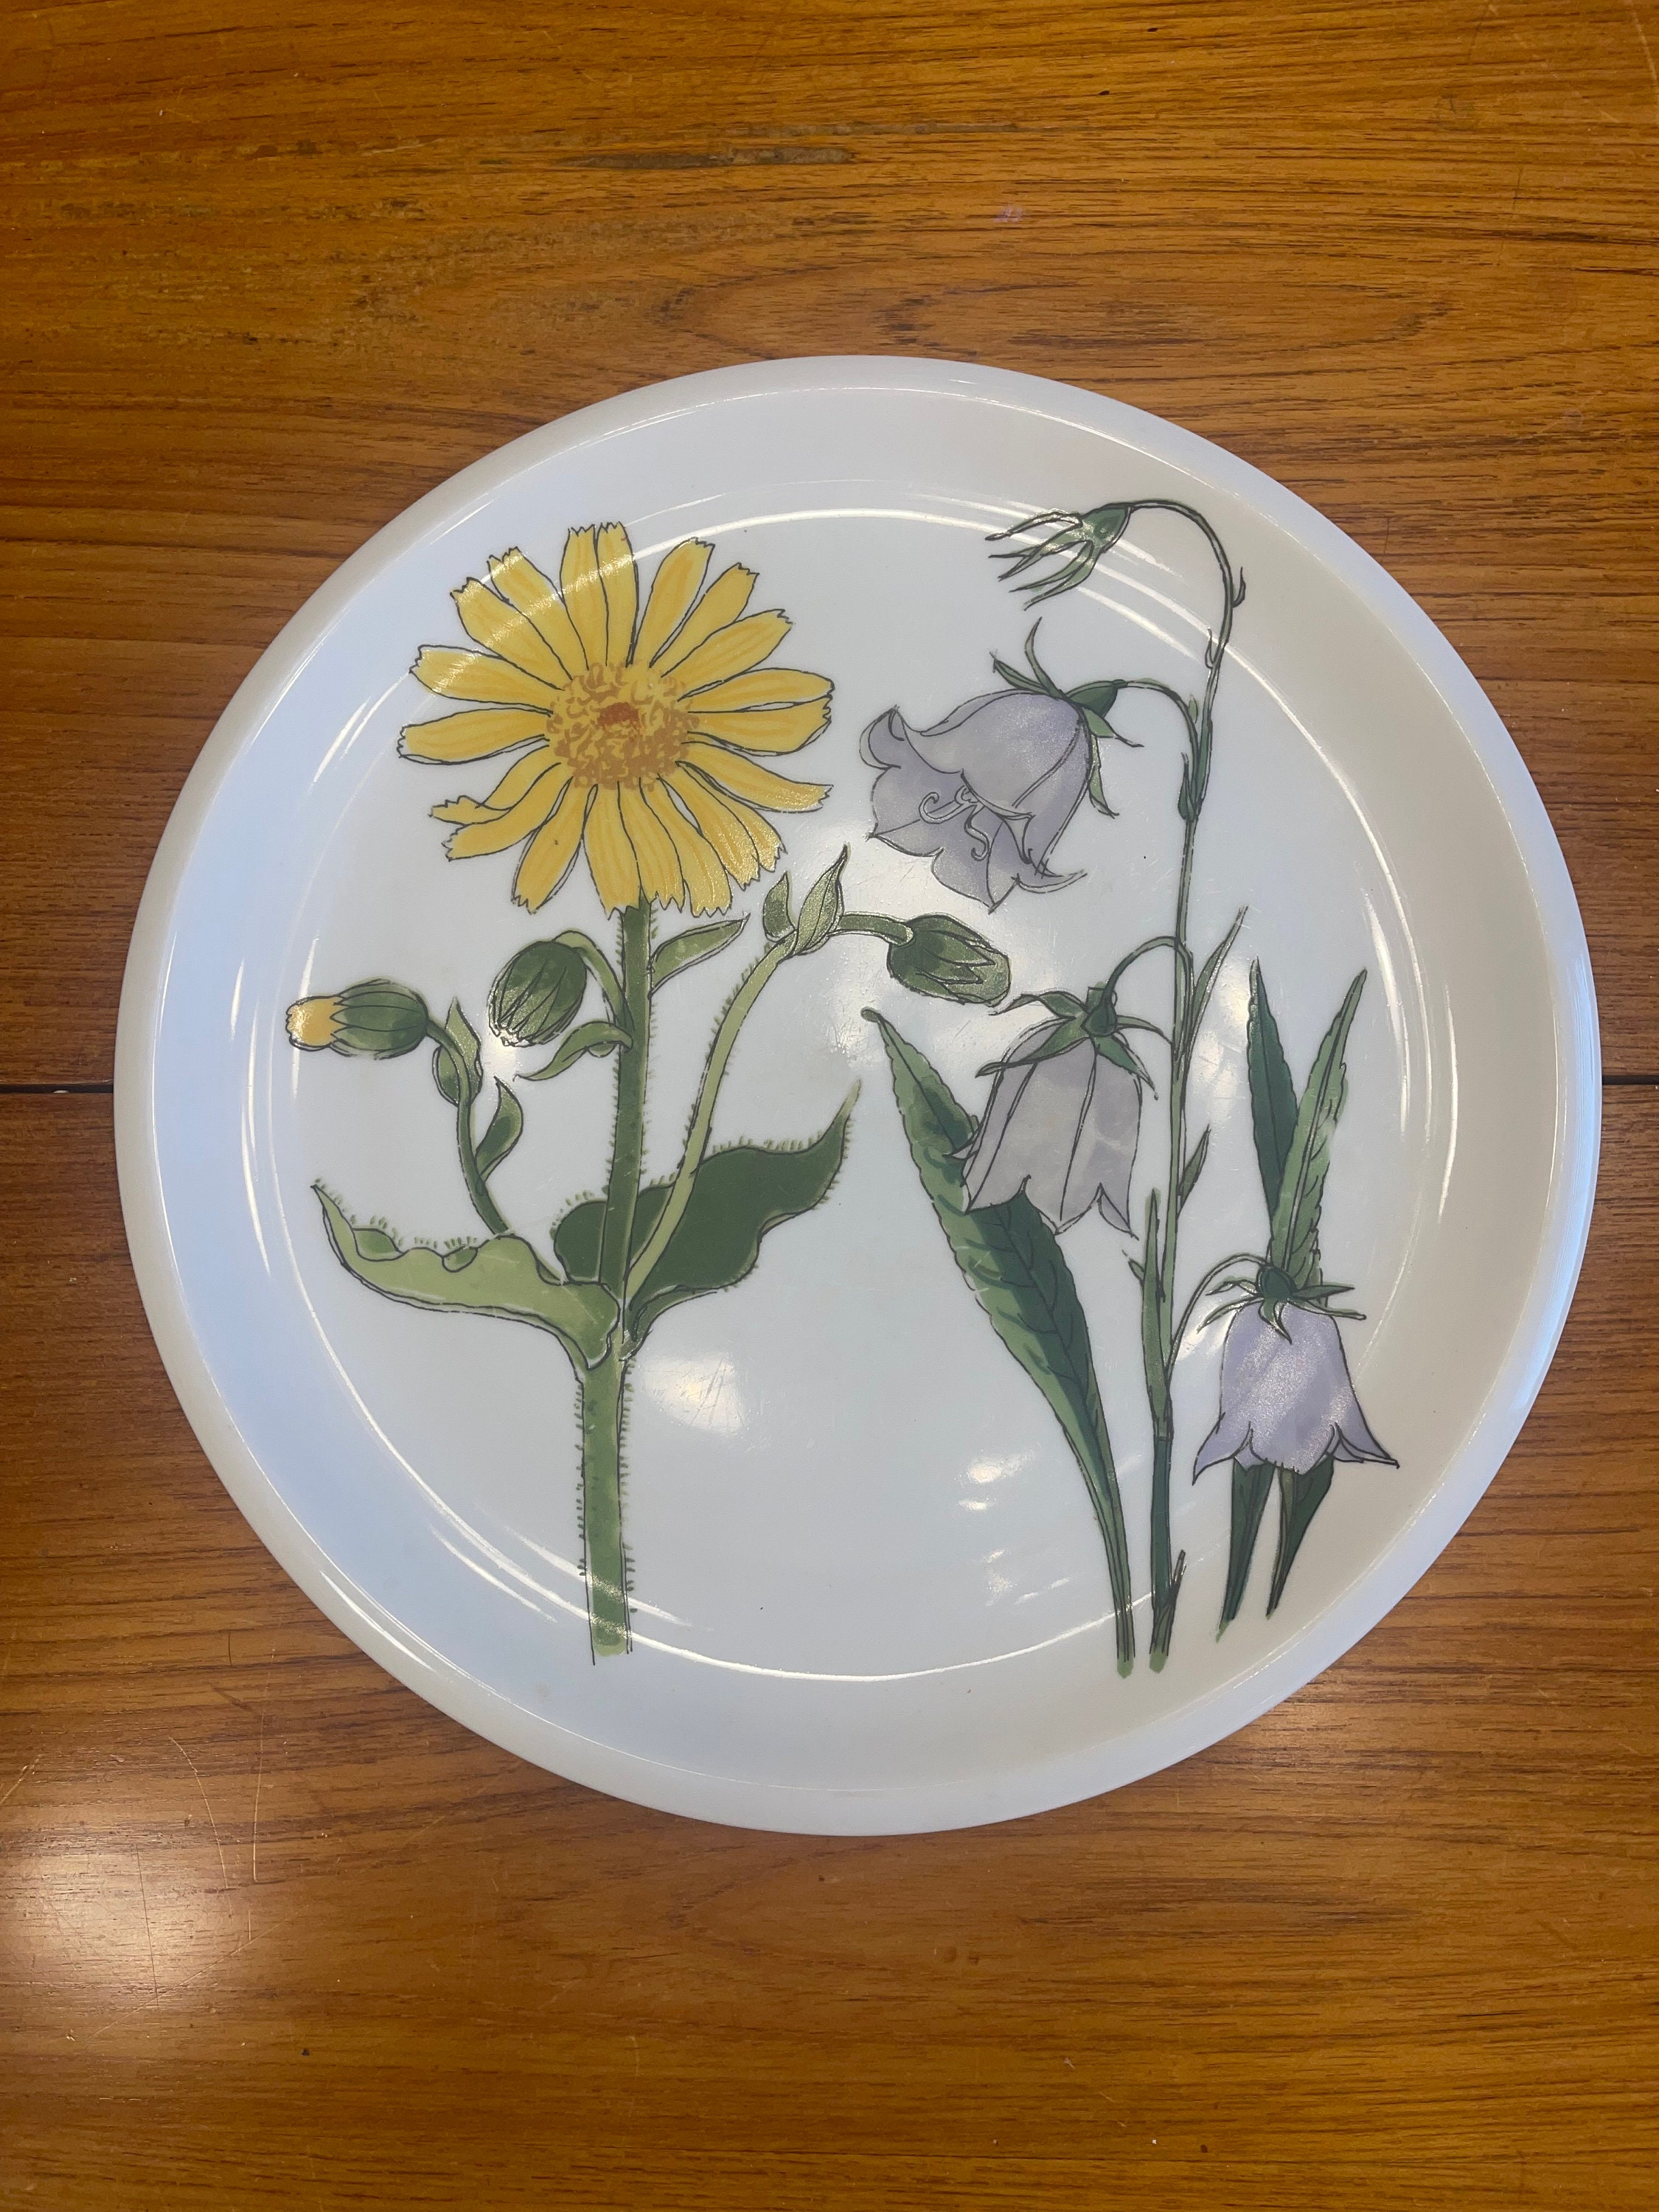 IKEA Plates. Two Deep Daisy Plates by Marguerite Walfridsson